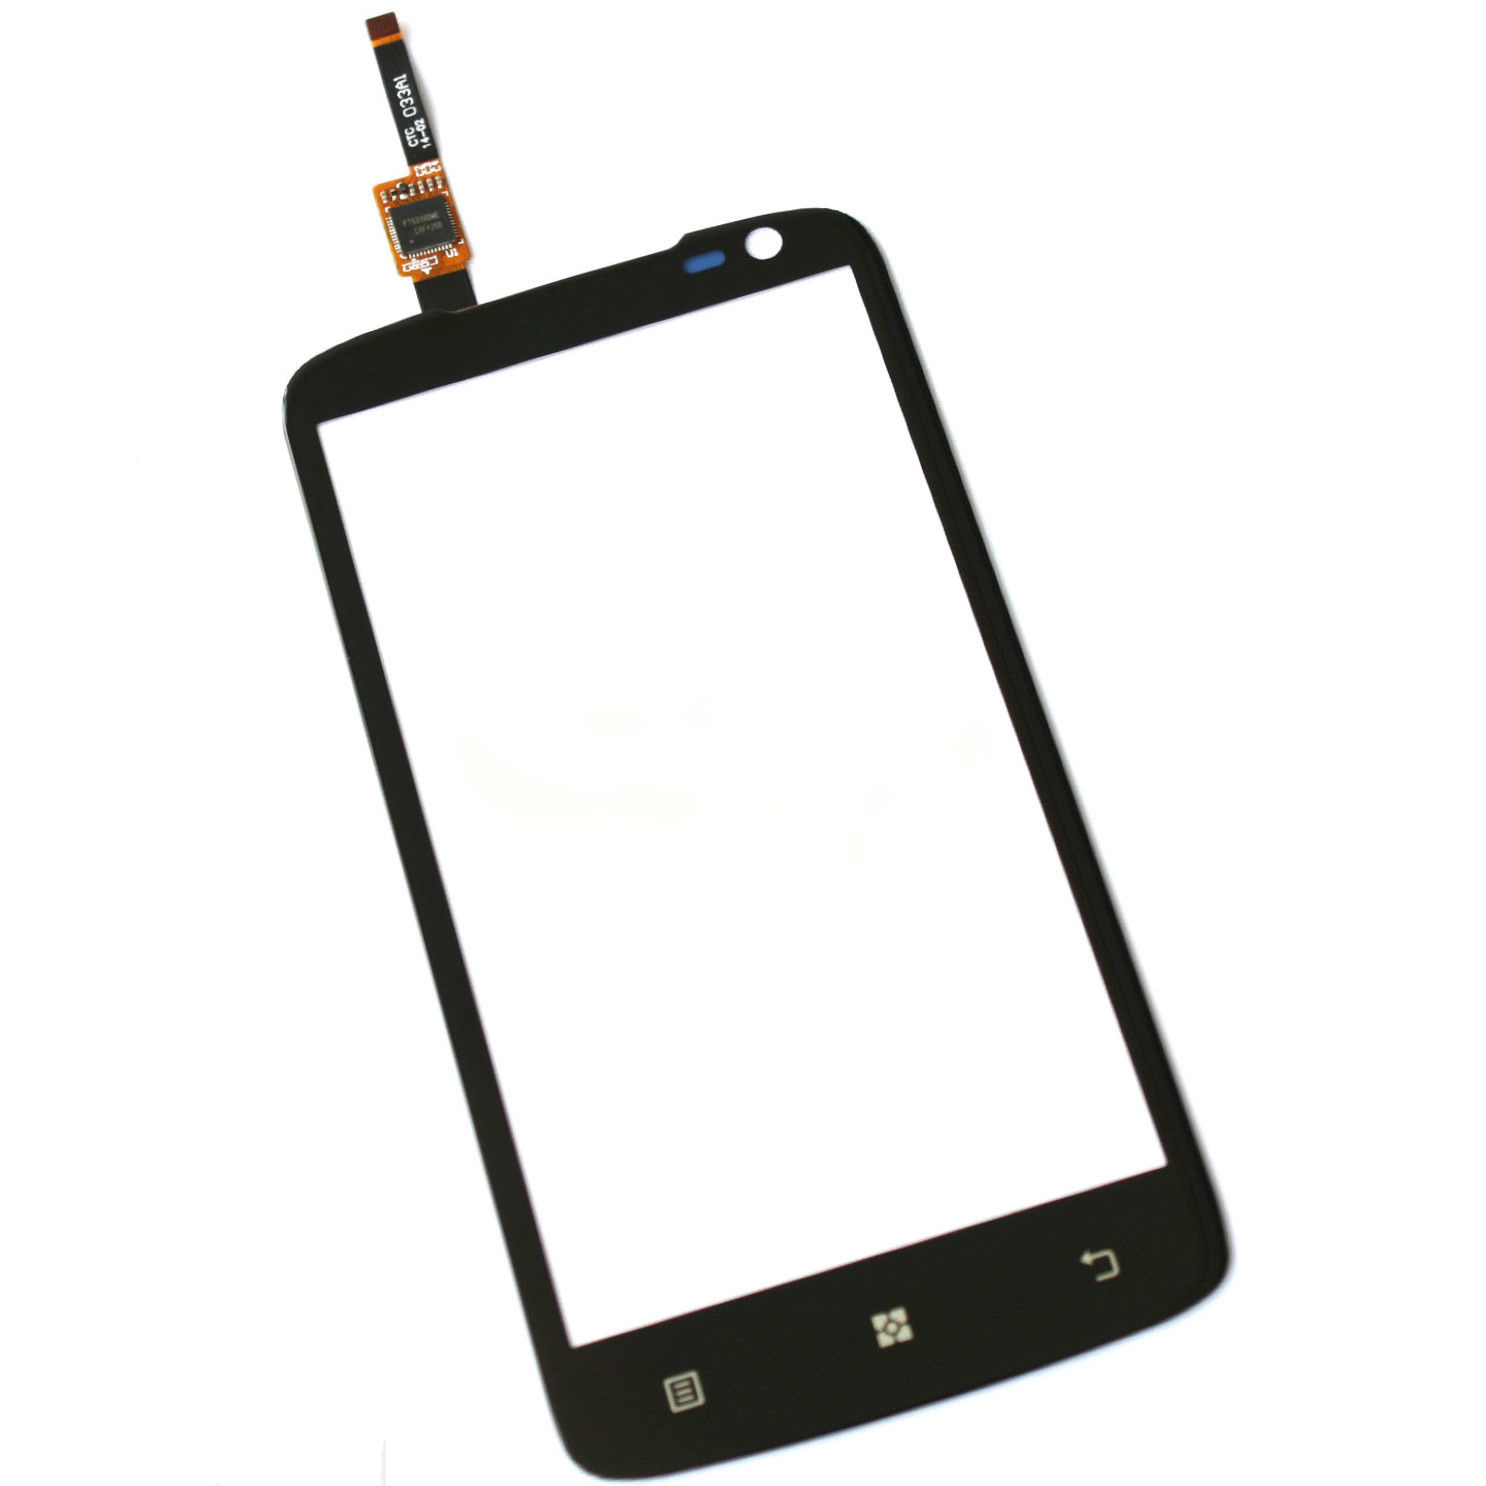 New Black 4 7 inch Touch Screen Digitizer Replacement For Lenovo S820 Mobile Phone Parts Free